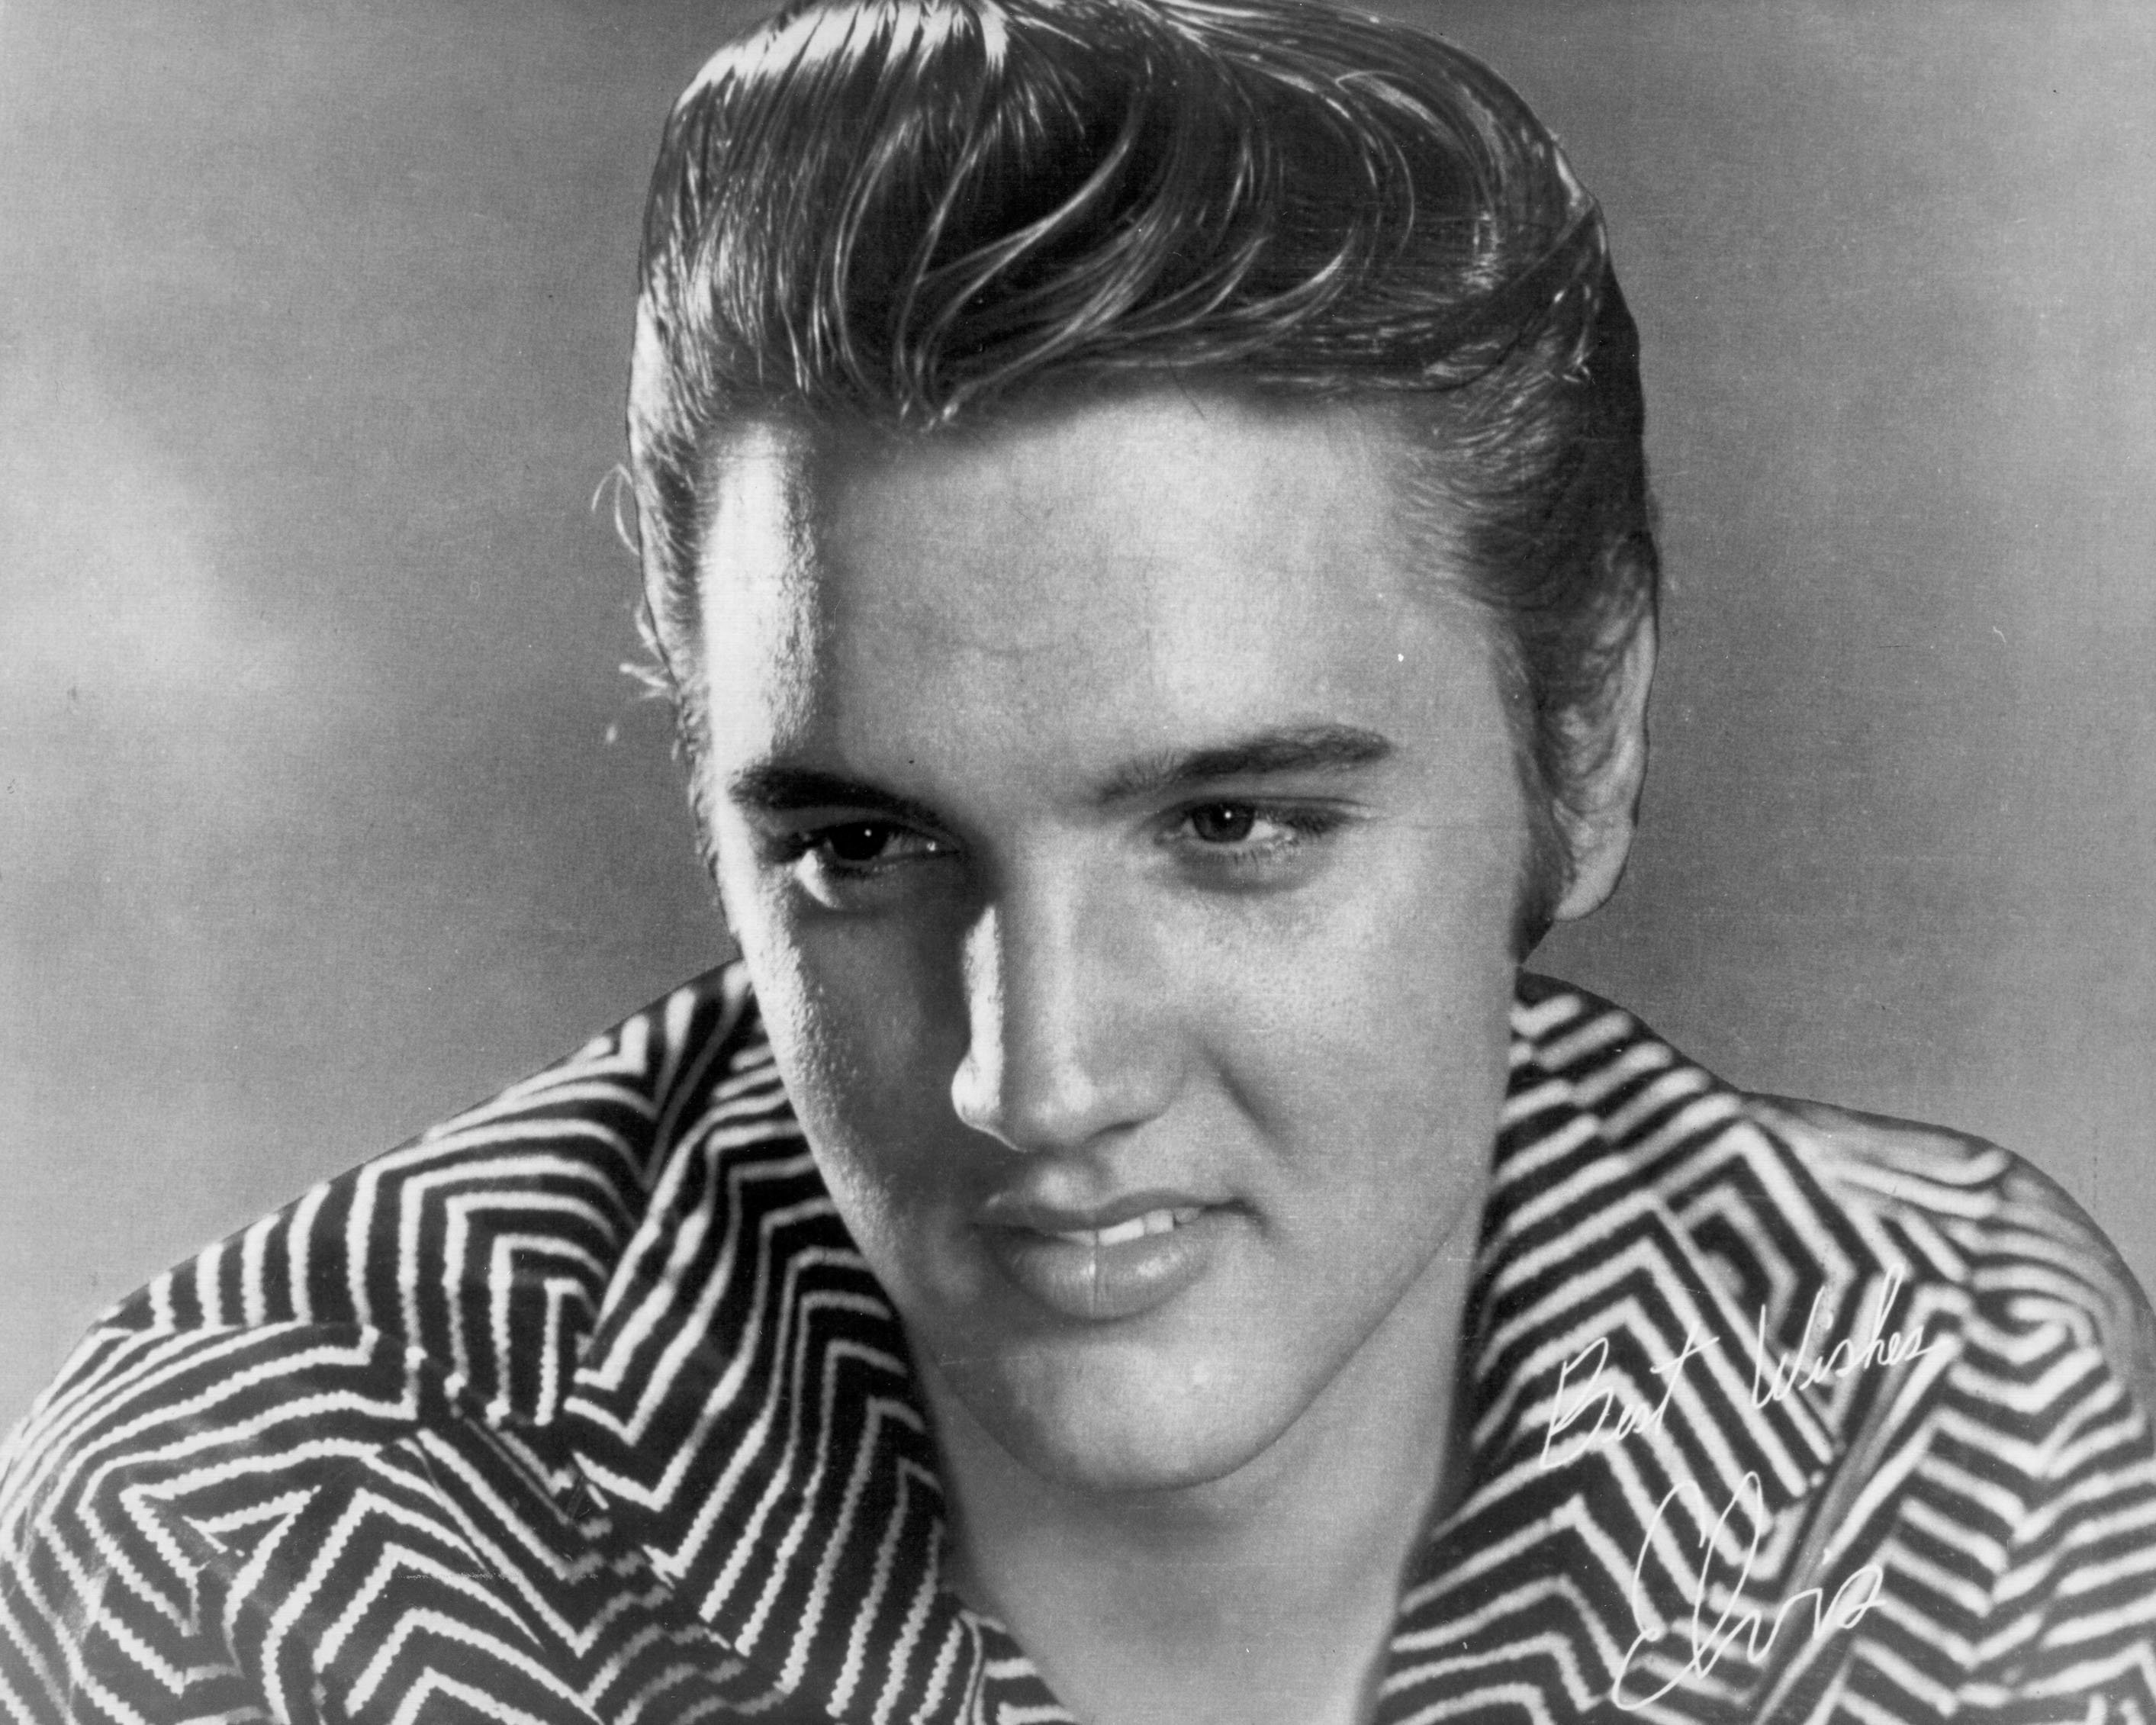 Elvis Presley smiling and wearing a striped shirt in a photo with his signature